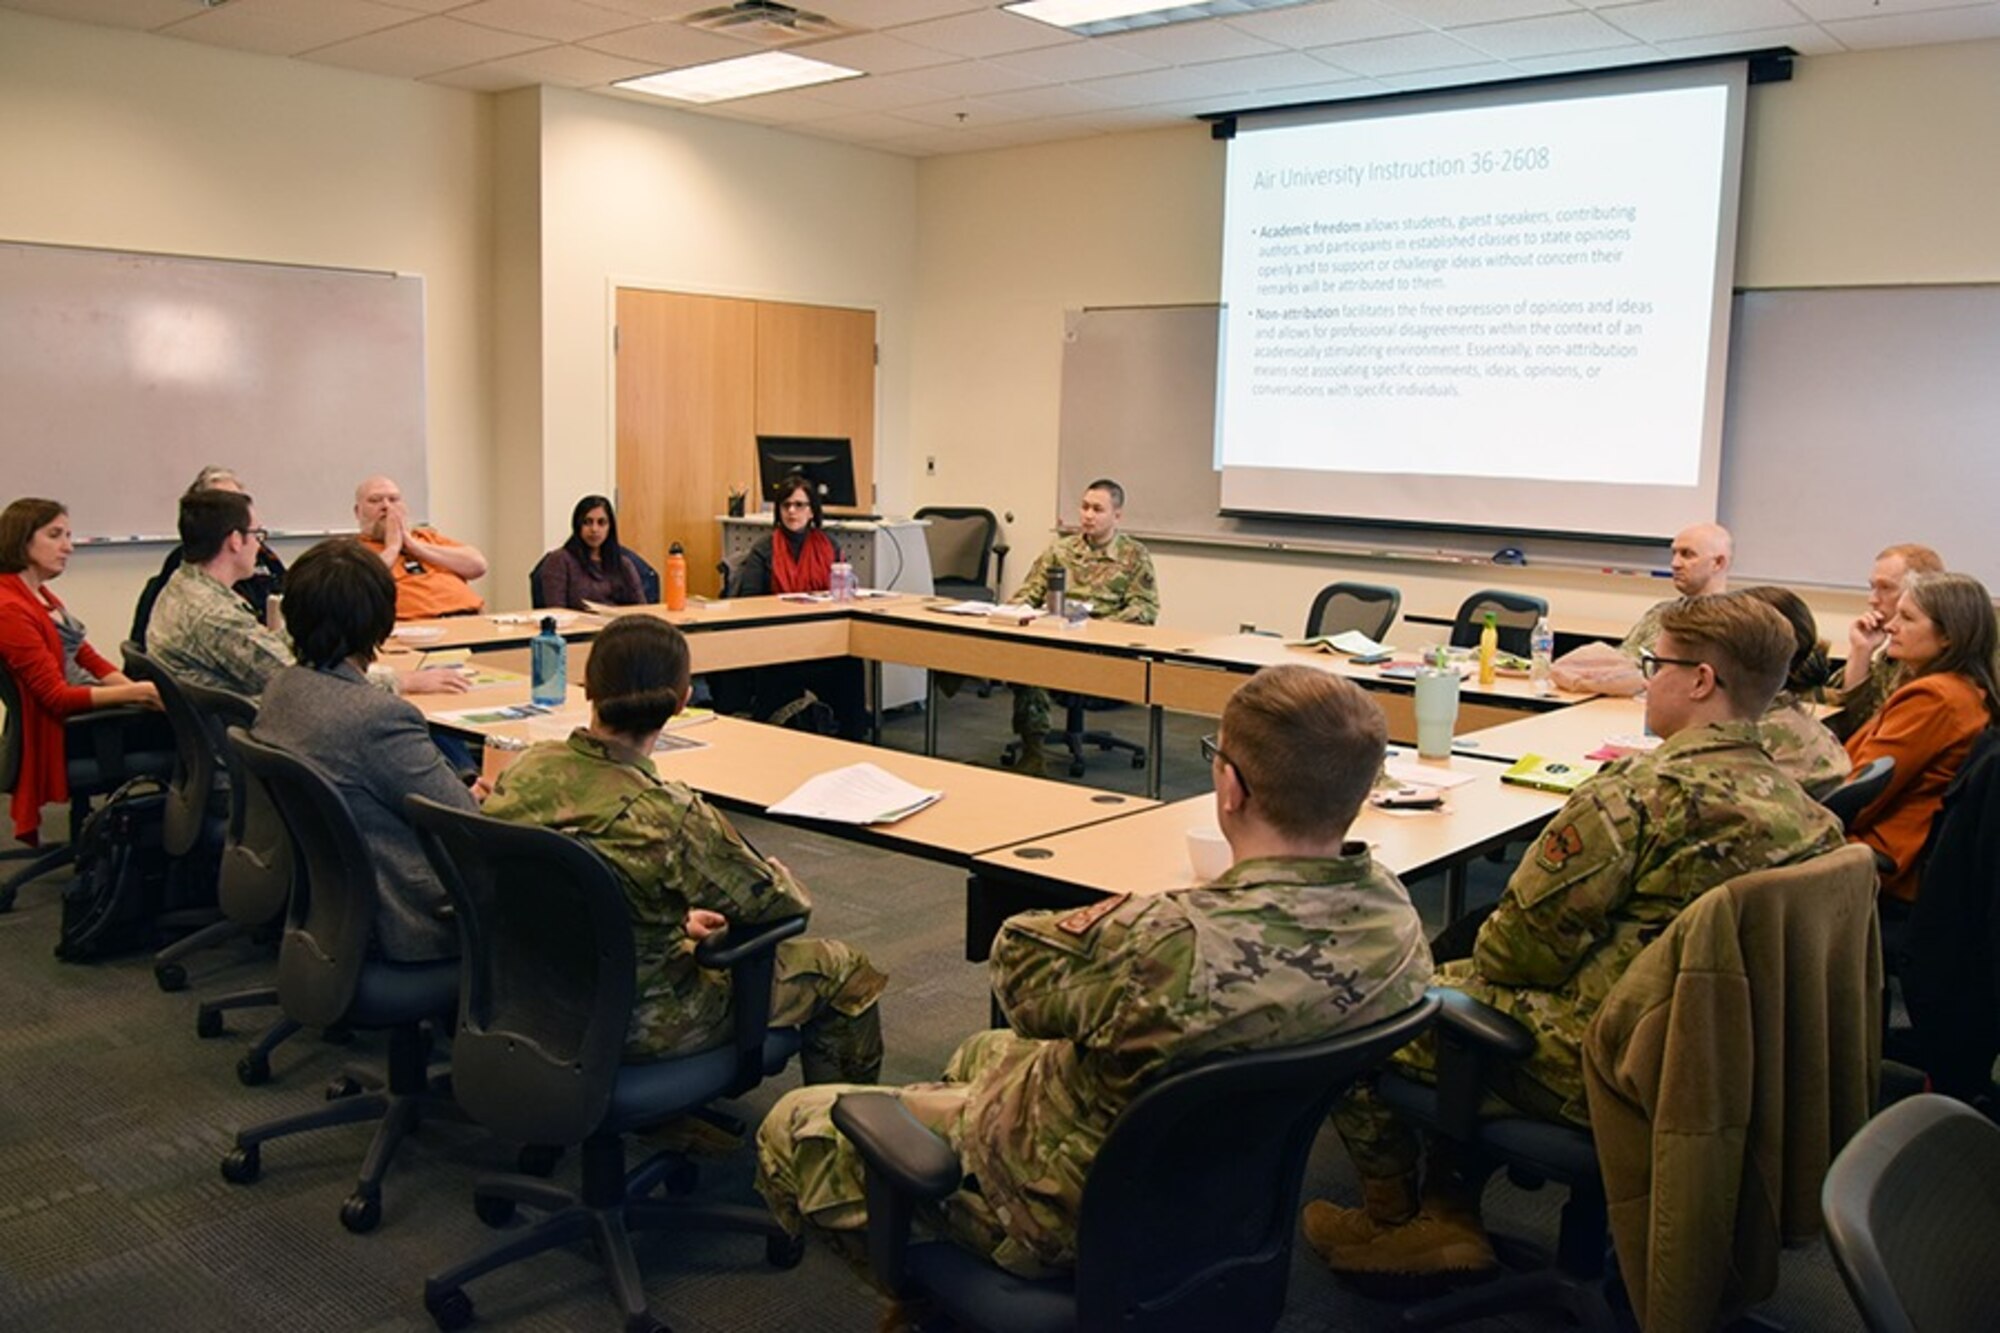 A joint Air Force Institute of Technology and Air Force Research Laboratory Diversity and Inclusion Book Club meeting was held in the Fall of 2019 (Courtesy photo)